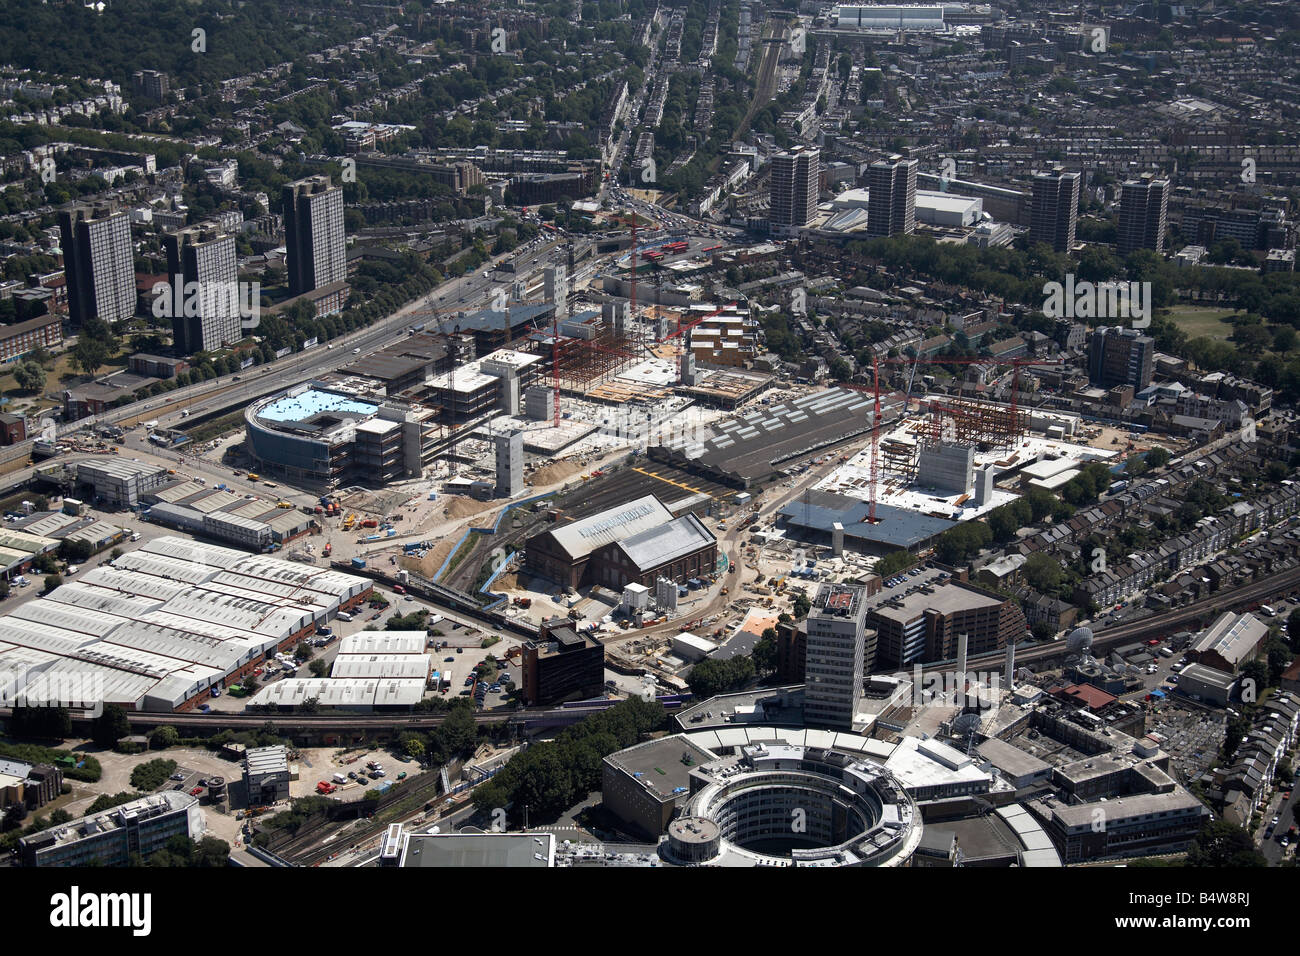 Aerial view south east of BBC TV Centre Wood Lane Westfield White City Development Construction Site London W12 England UK Stock Photo